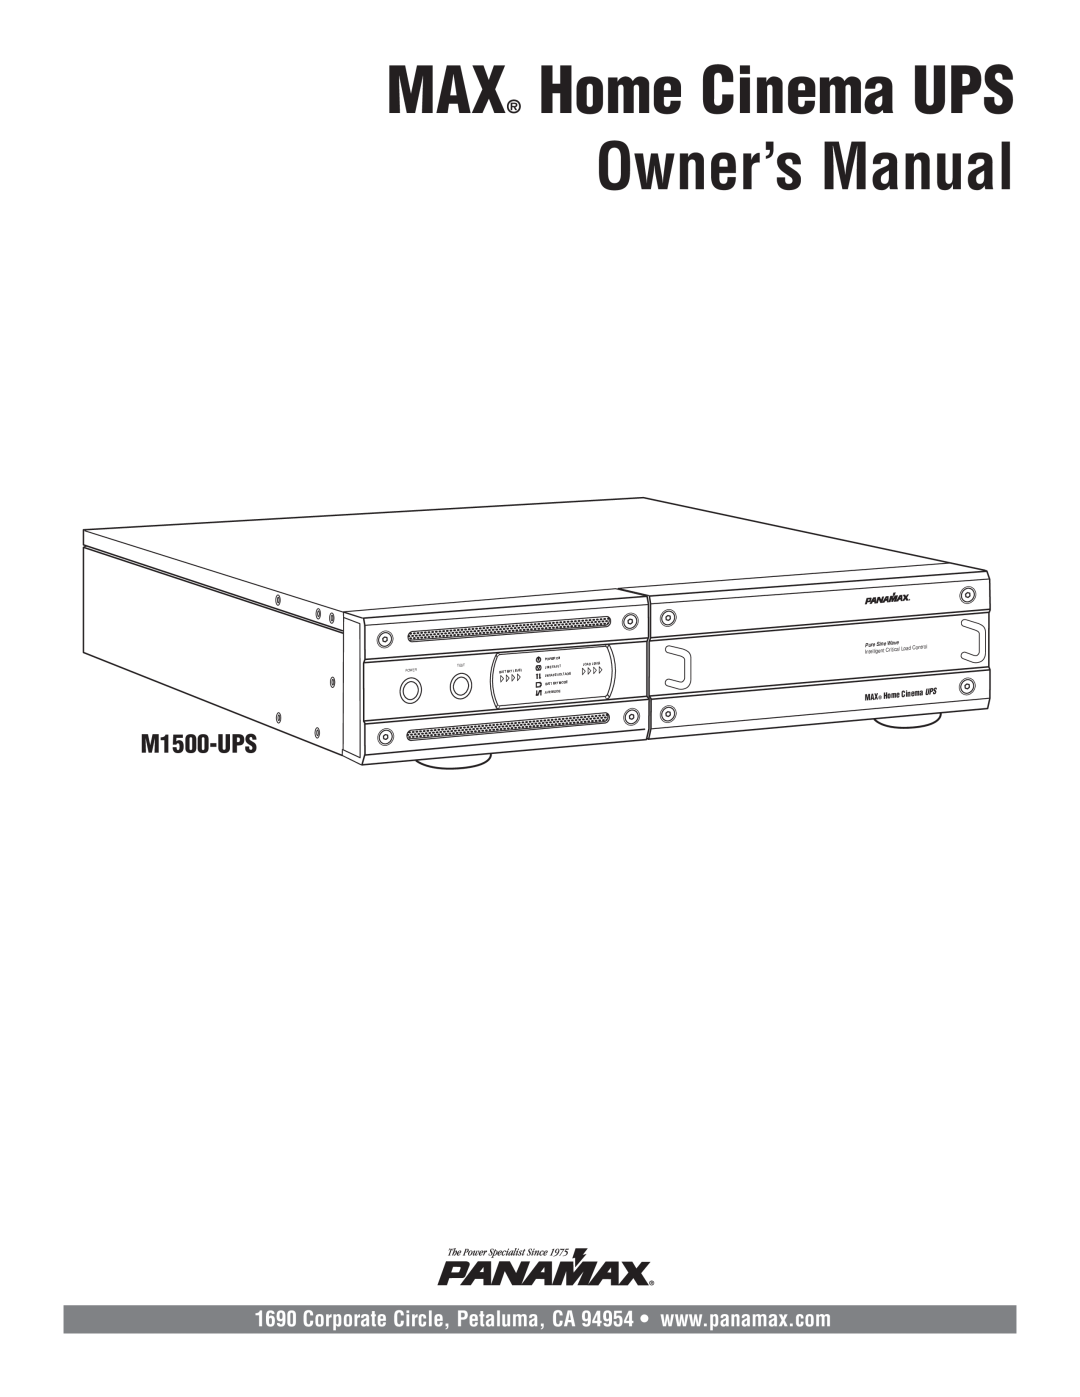 Panamax M1500-UPS owner manual Owner’s Manual, MAX Home Cinema UPS, Wave, Control, Test, Power On, Line Fault 